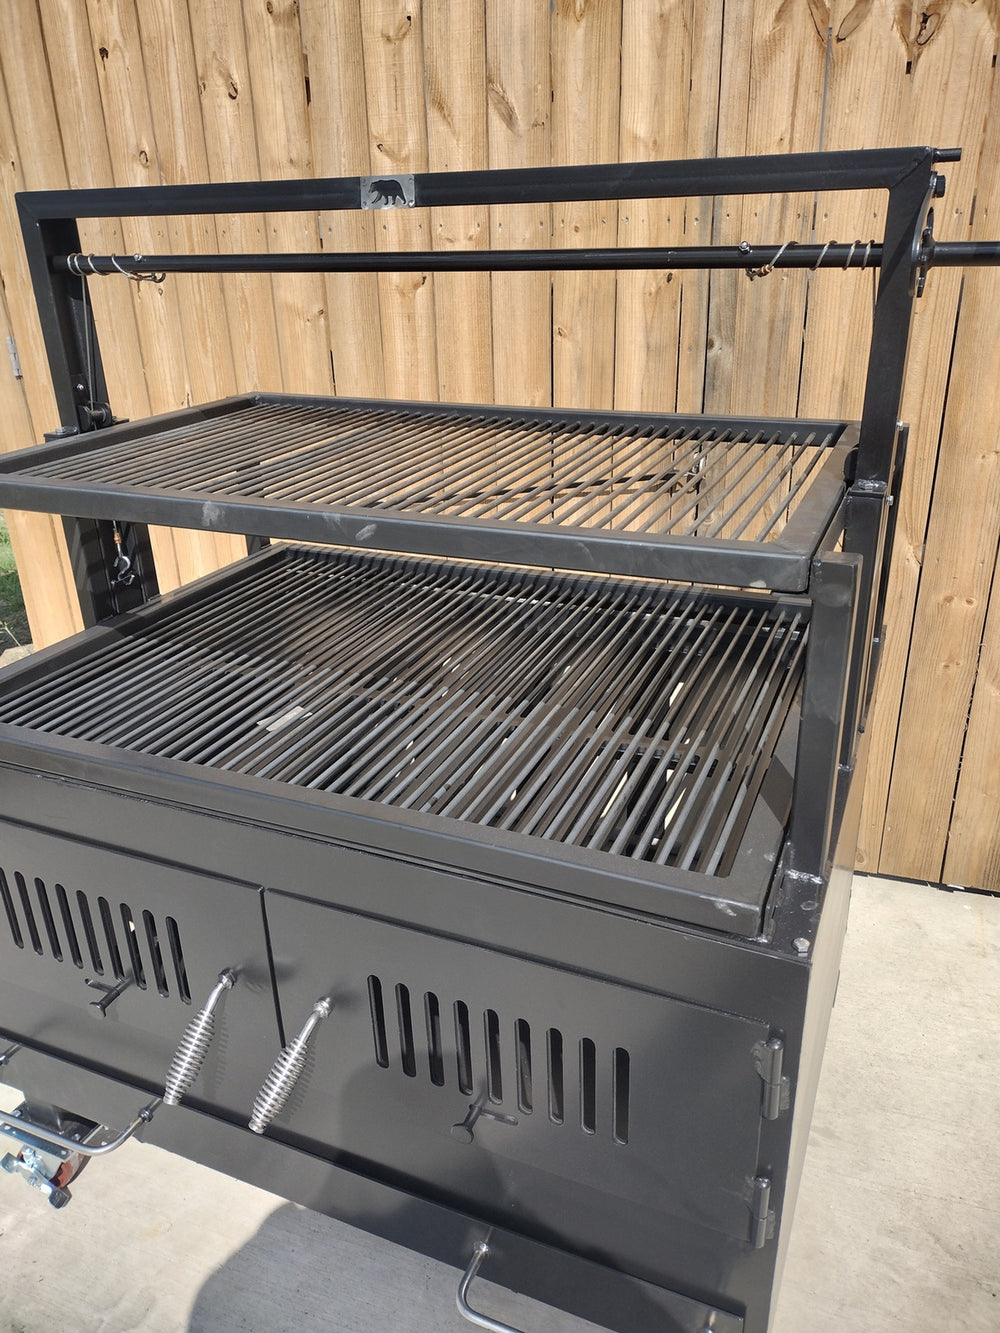 4446 COMMERCIAL Tiered Charbroiler Grill - Heritage Backyard